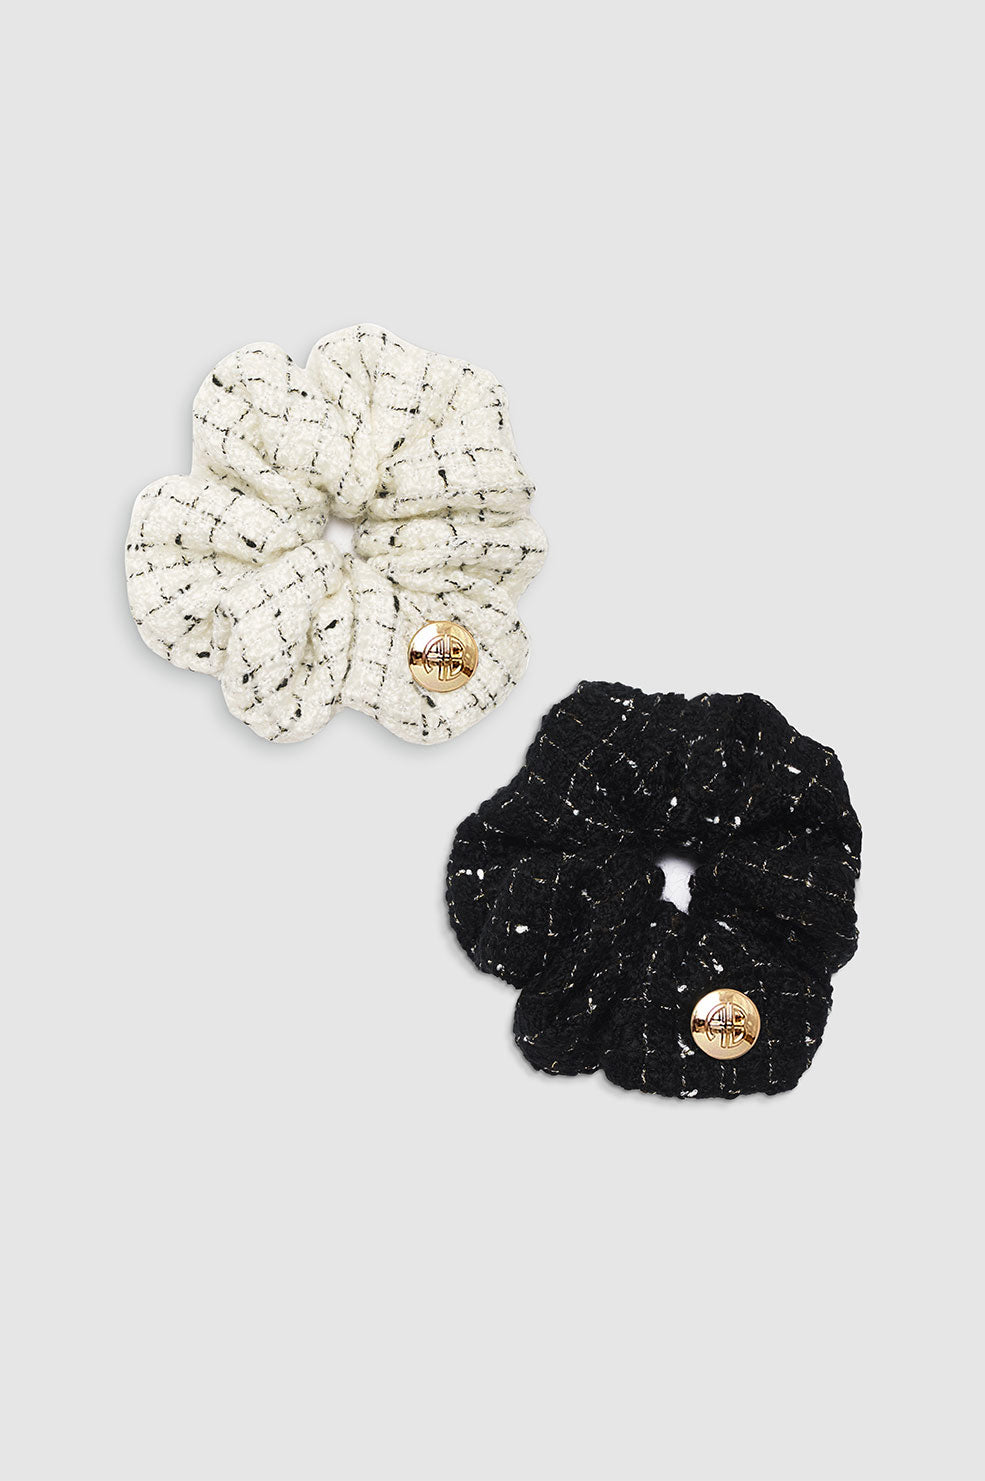 ANINE BING Camellia Scrunchie 2 Pack - Cream And Black Tweed - Front View Both Colorways